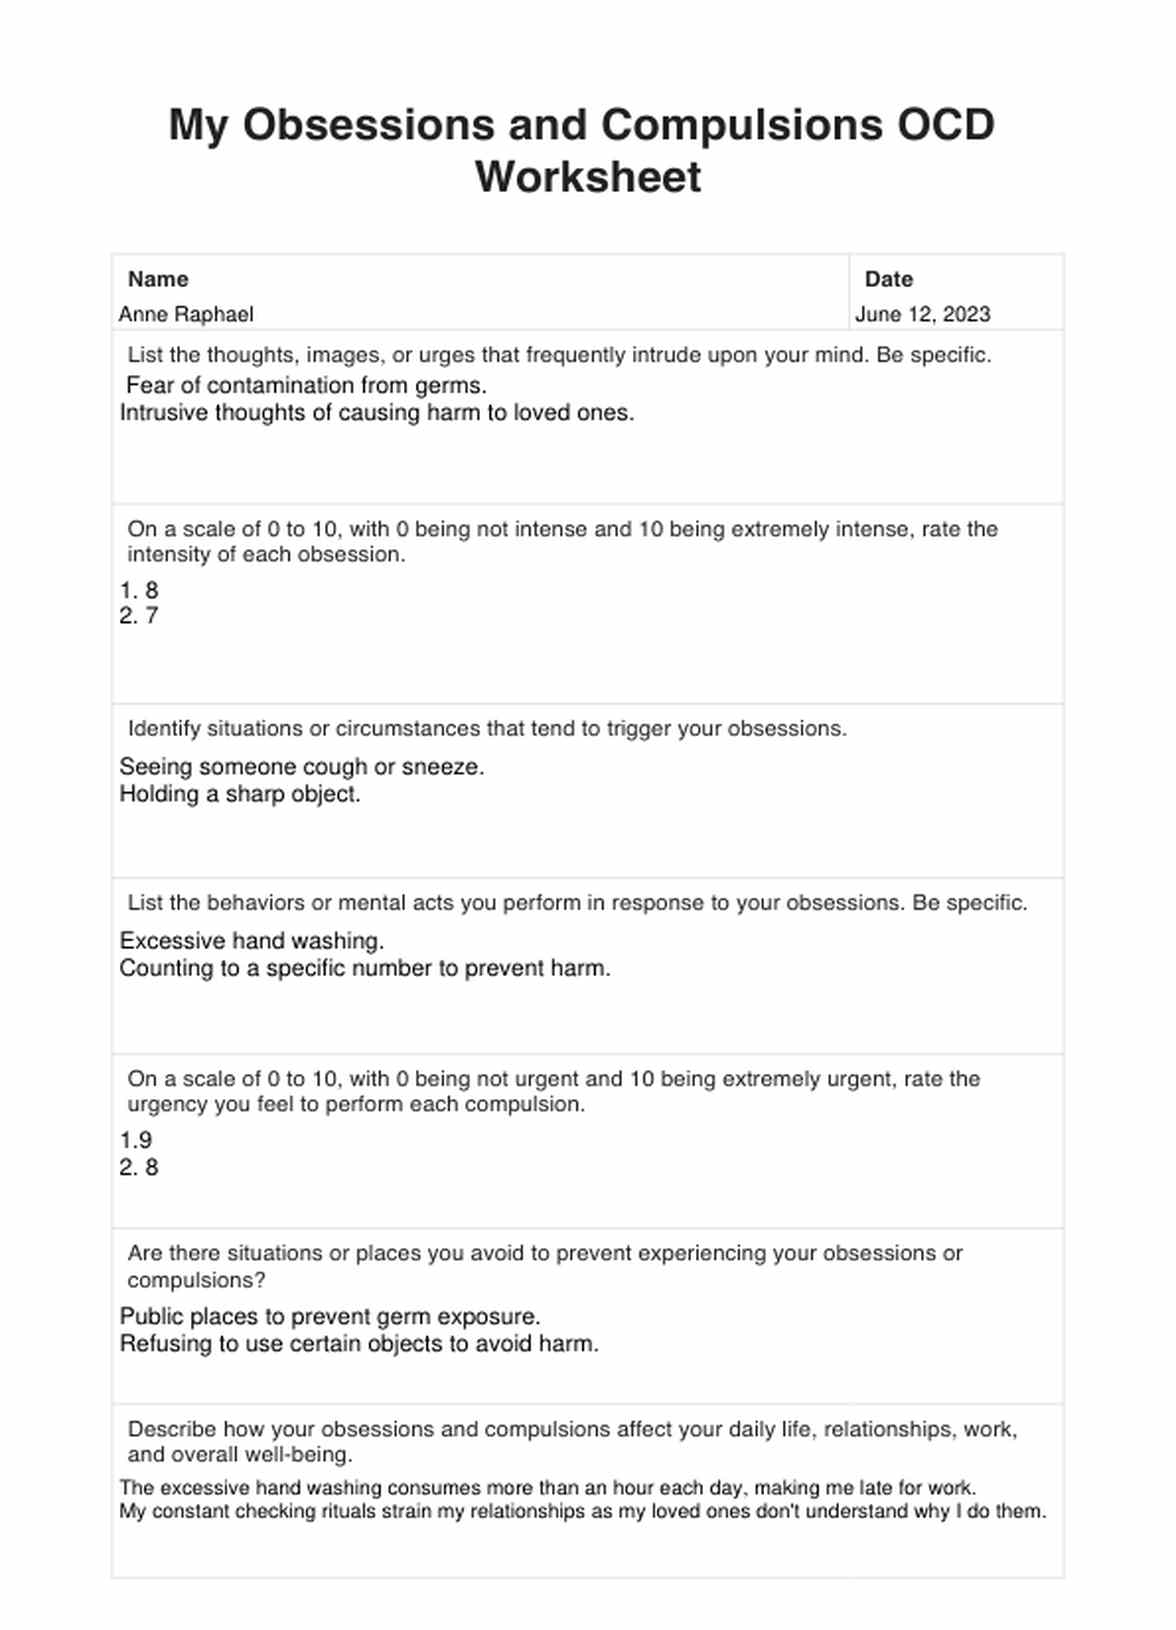 My Obsessions and Compulsions OCD Worksheet PDF Example